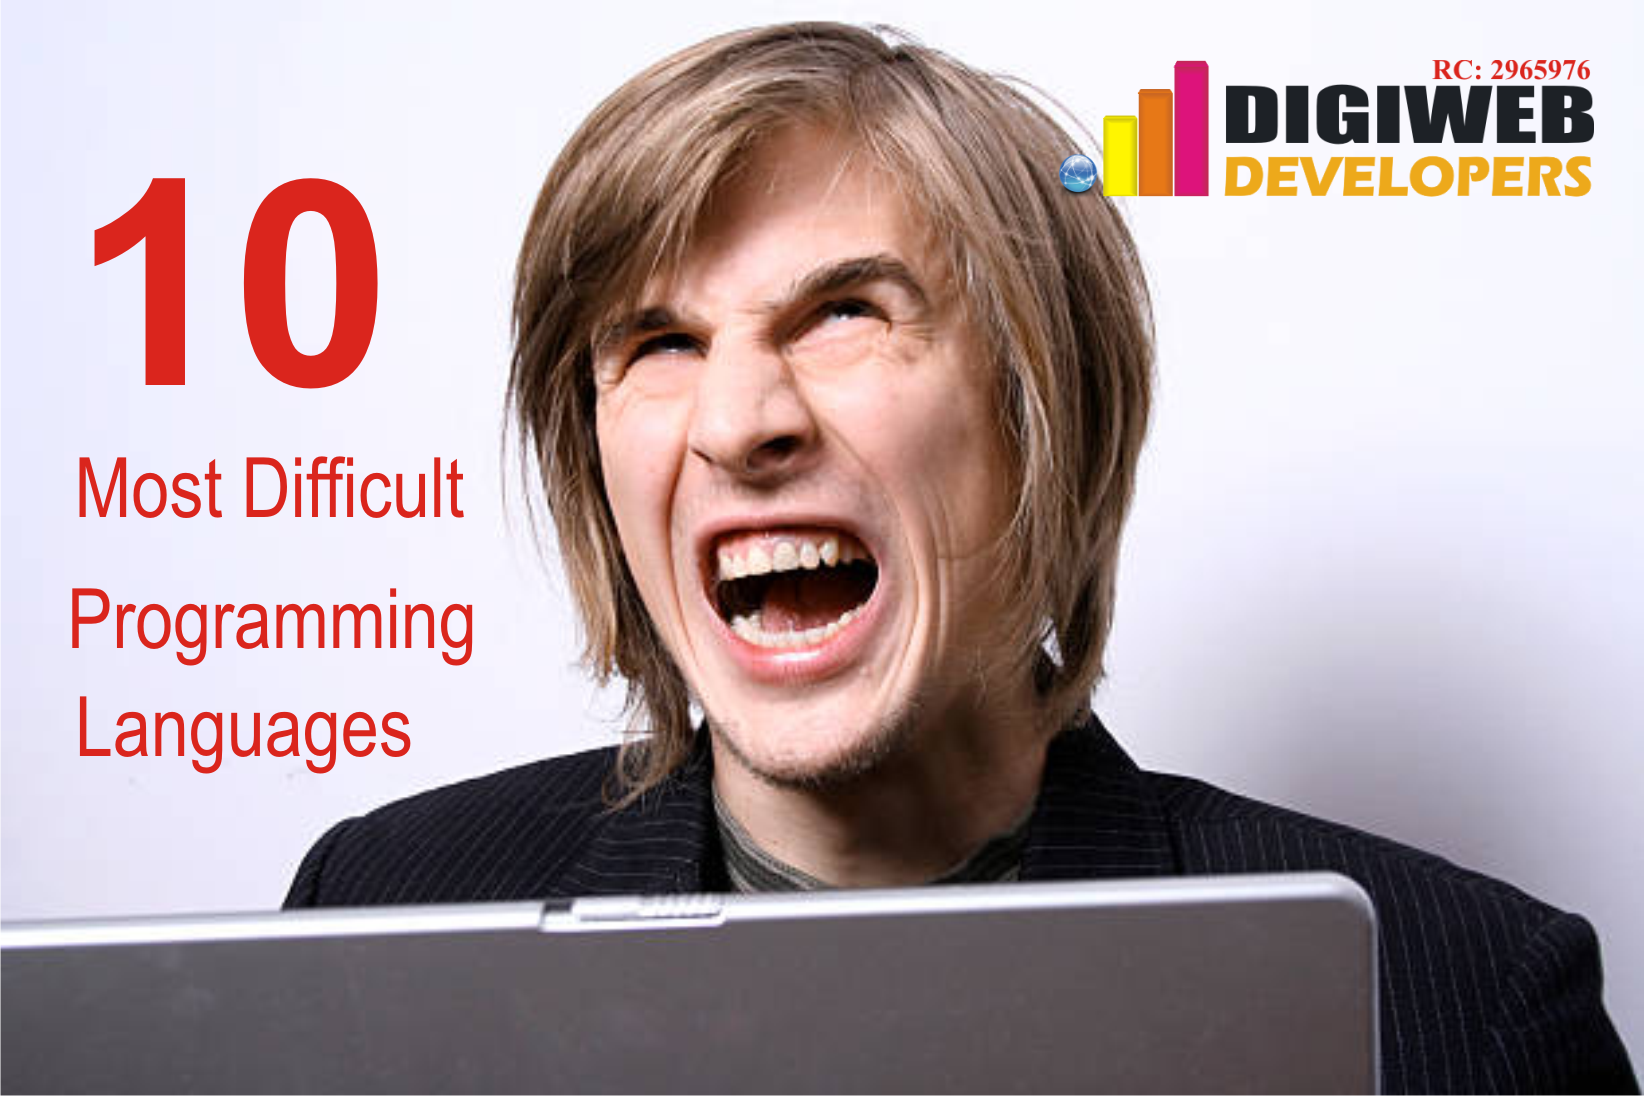 Ten Most Difficult Programming Languages You Don’t Know About